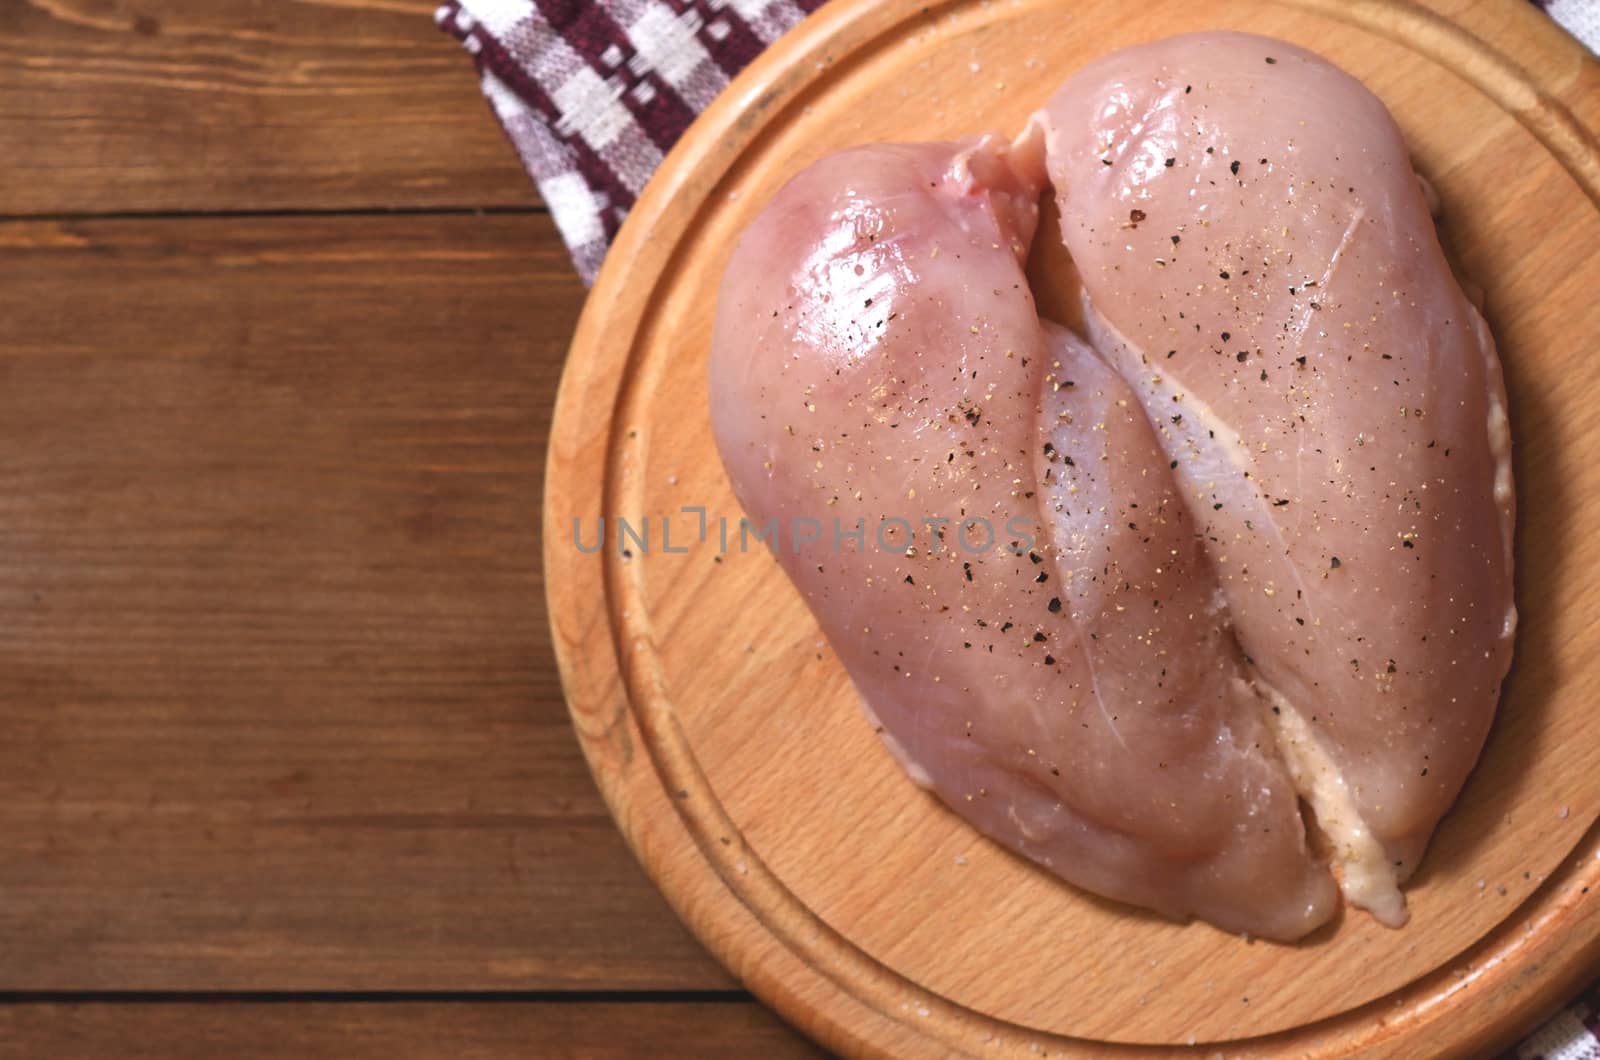 Raw chicken breast sprinkled with black pepper and salt lies on a round wooden Board. Horizontal close-up photo